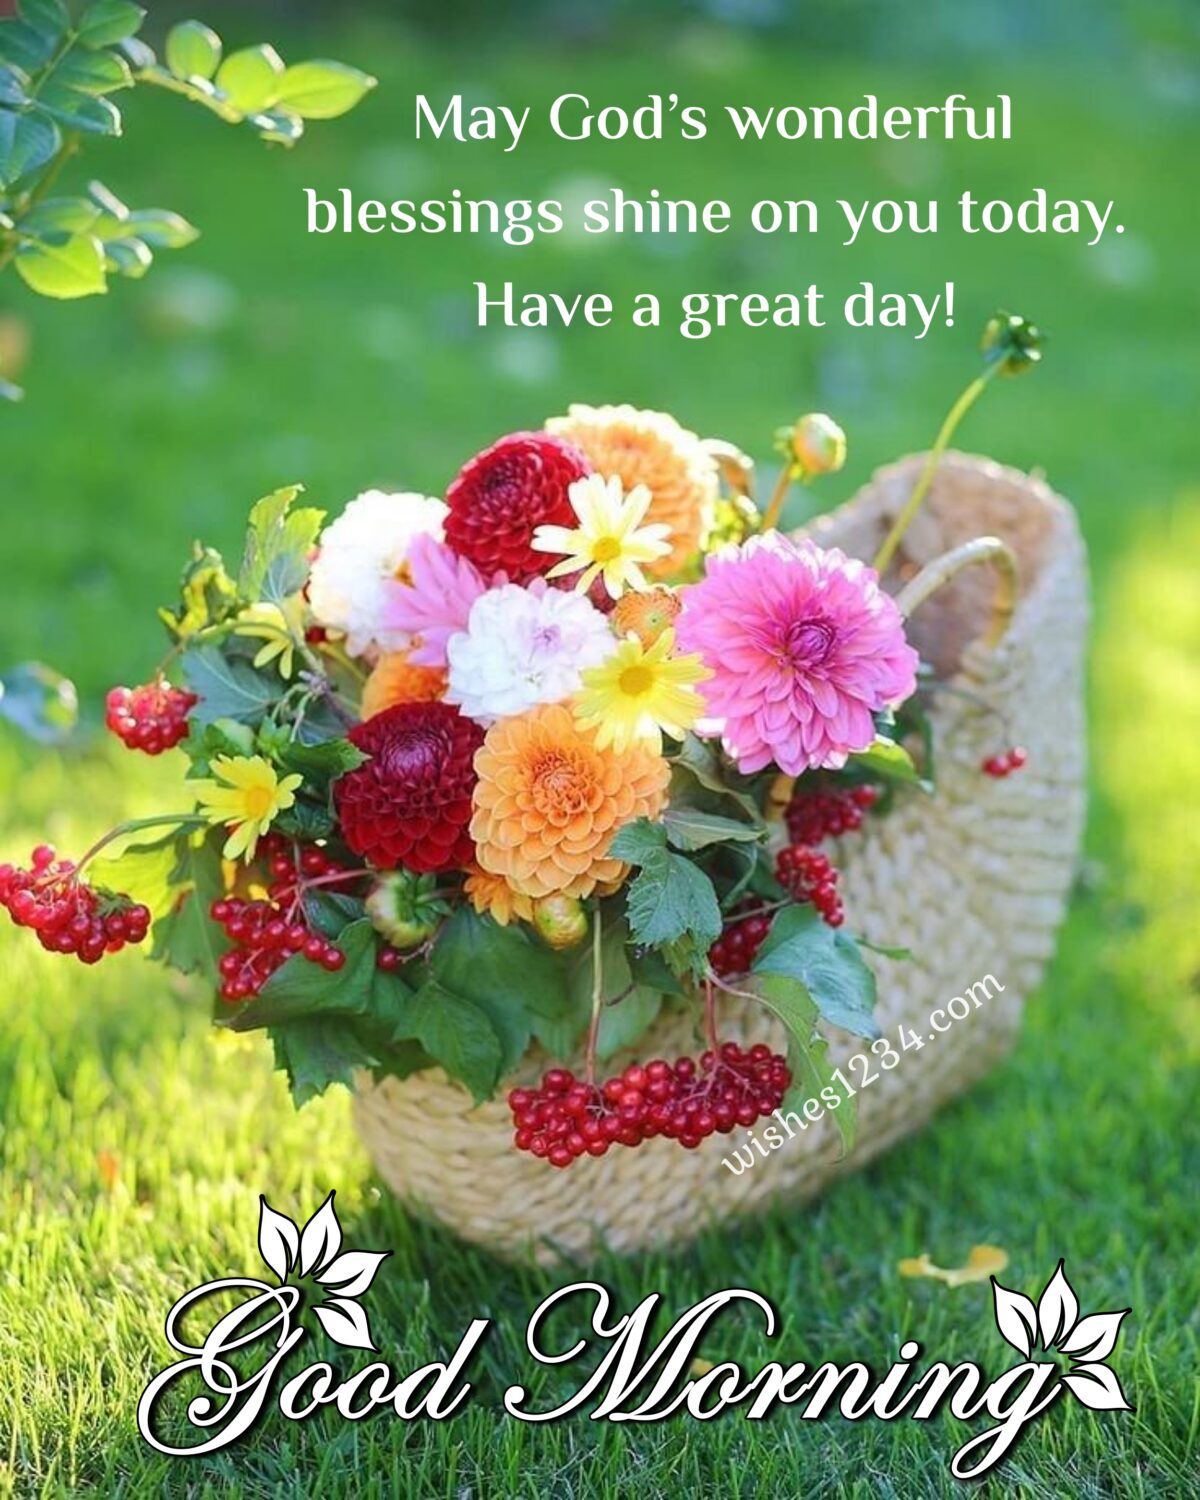 Basket with flowers, Morning Blessing Images.